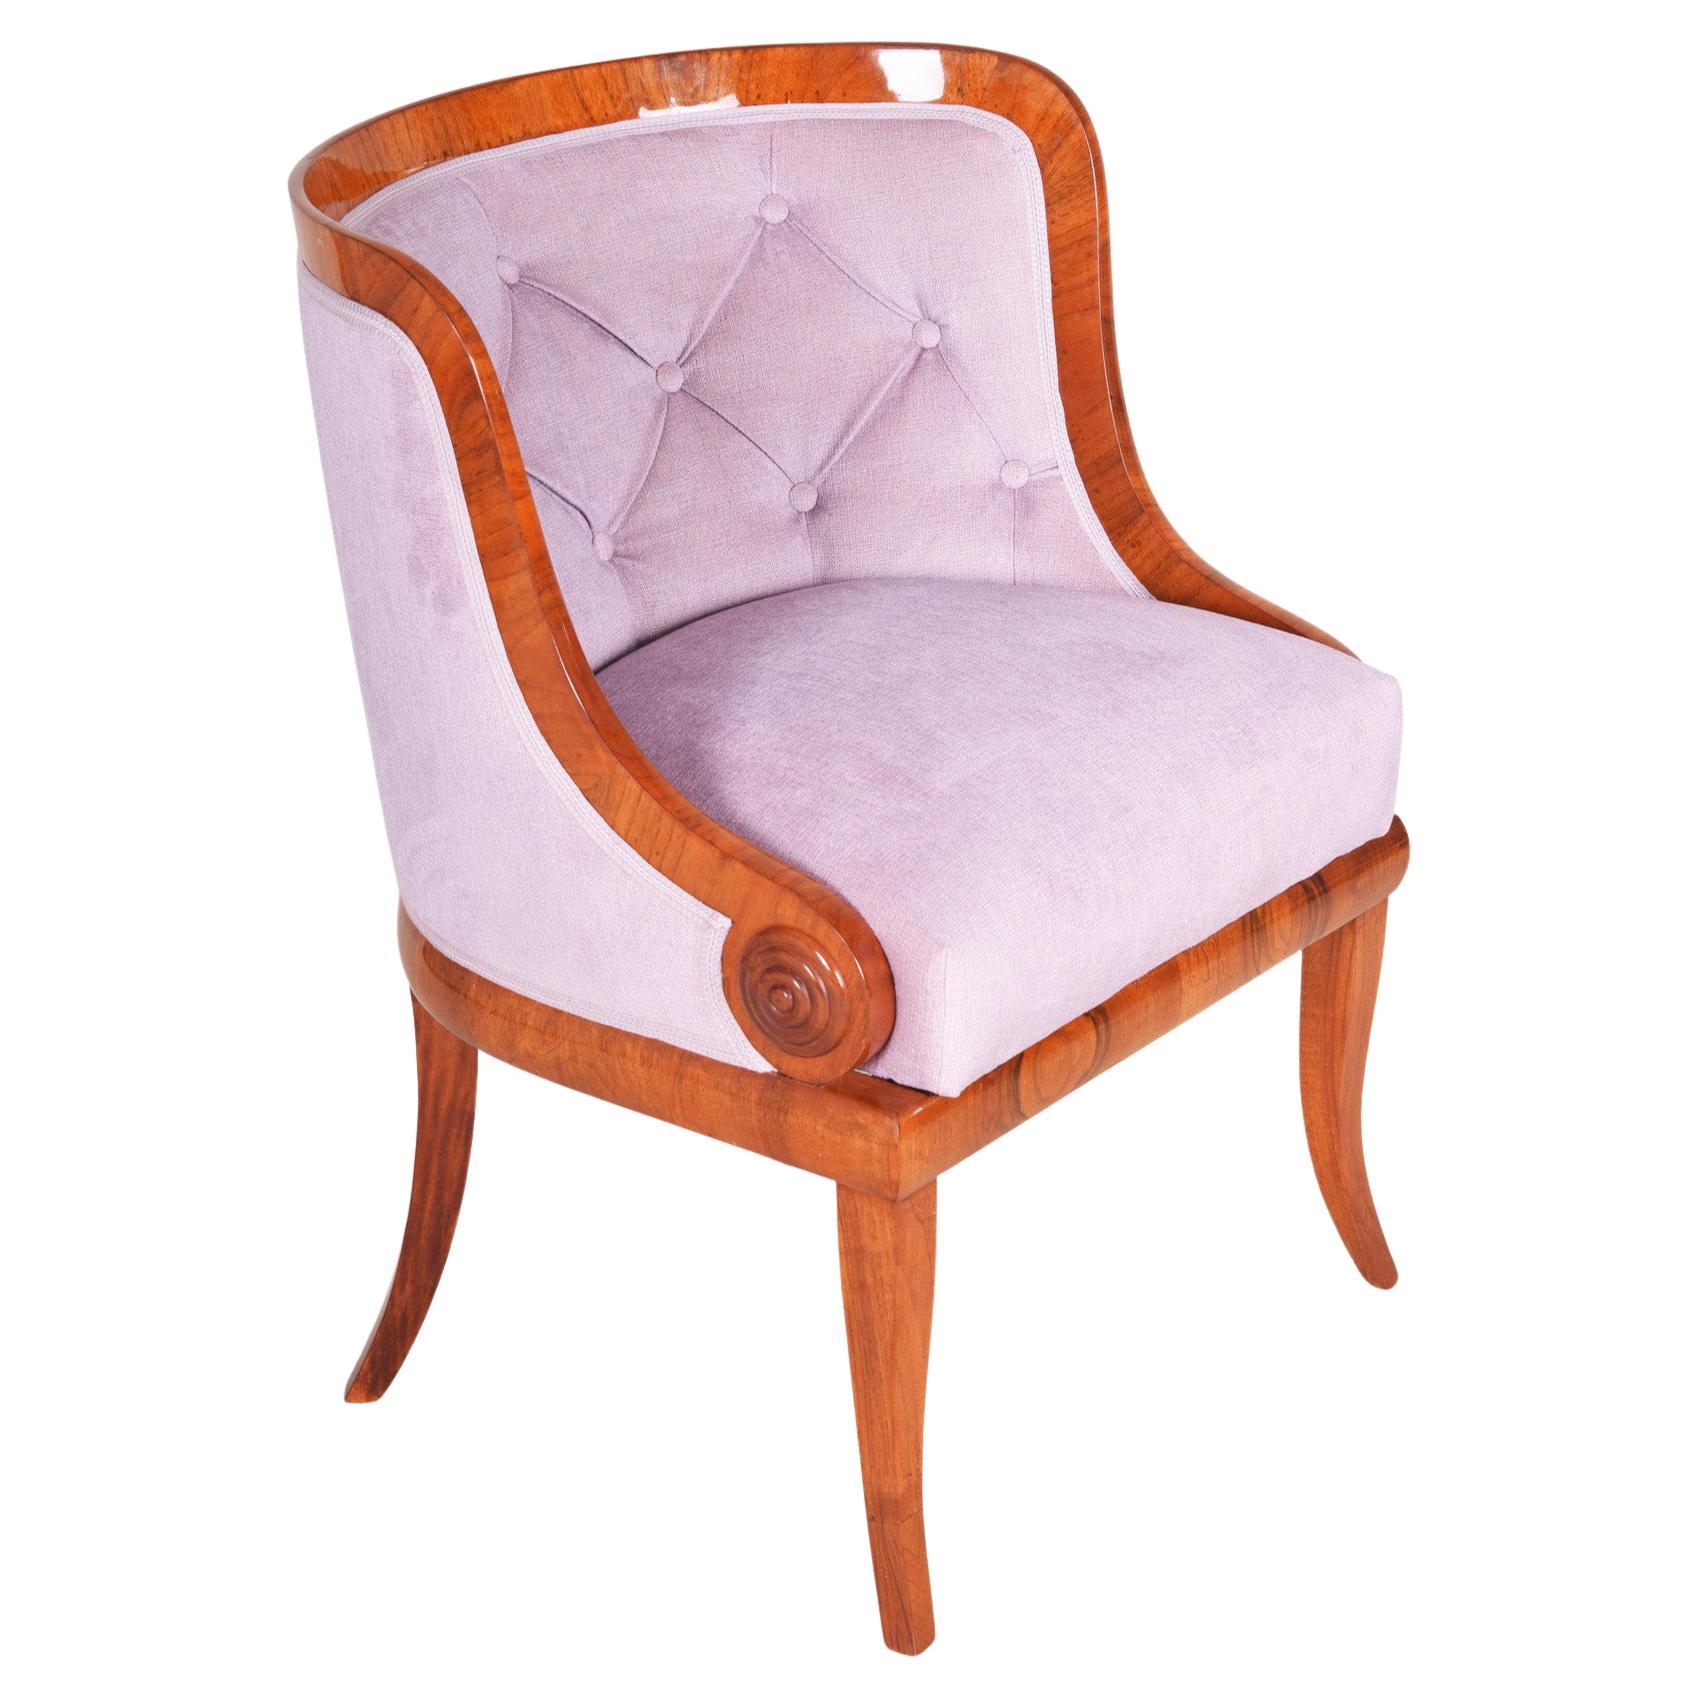 Brown and Pink Bohemian Armchair Made Out of Walnut, 1820s, Biedermeier Style For Sale